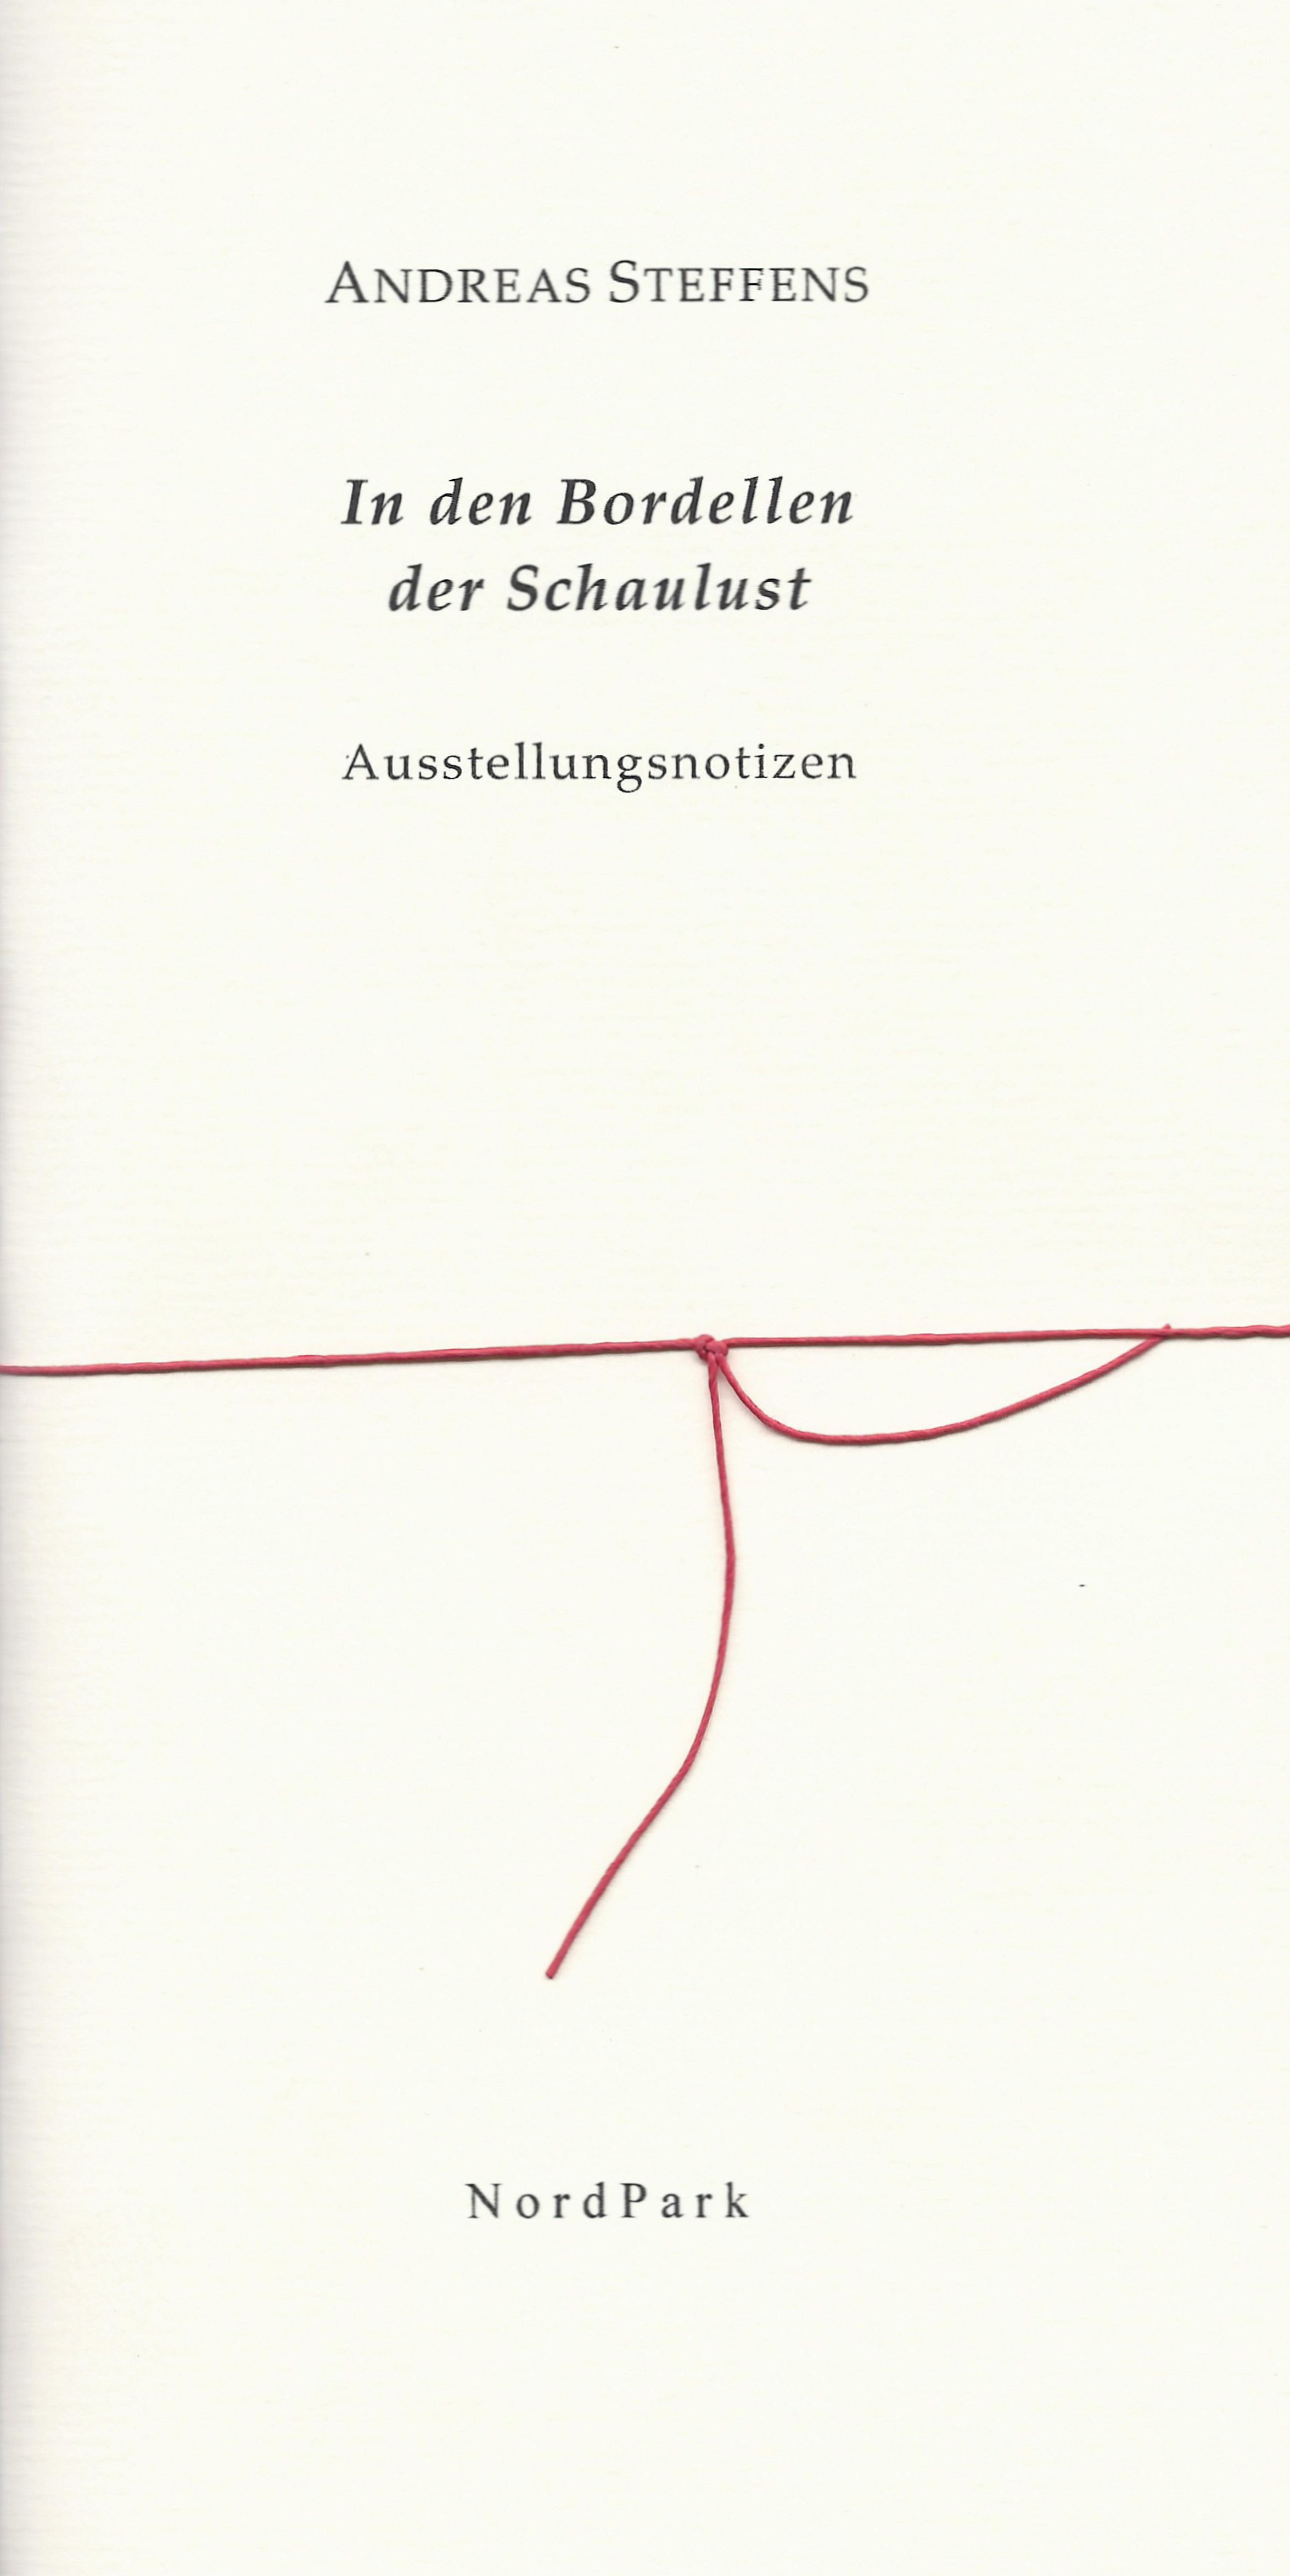 images/steffens-bordelle-cover.gif